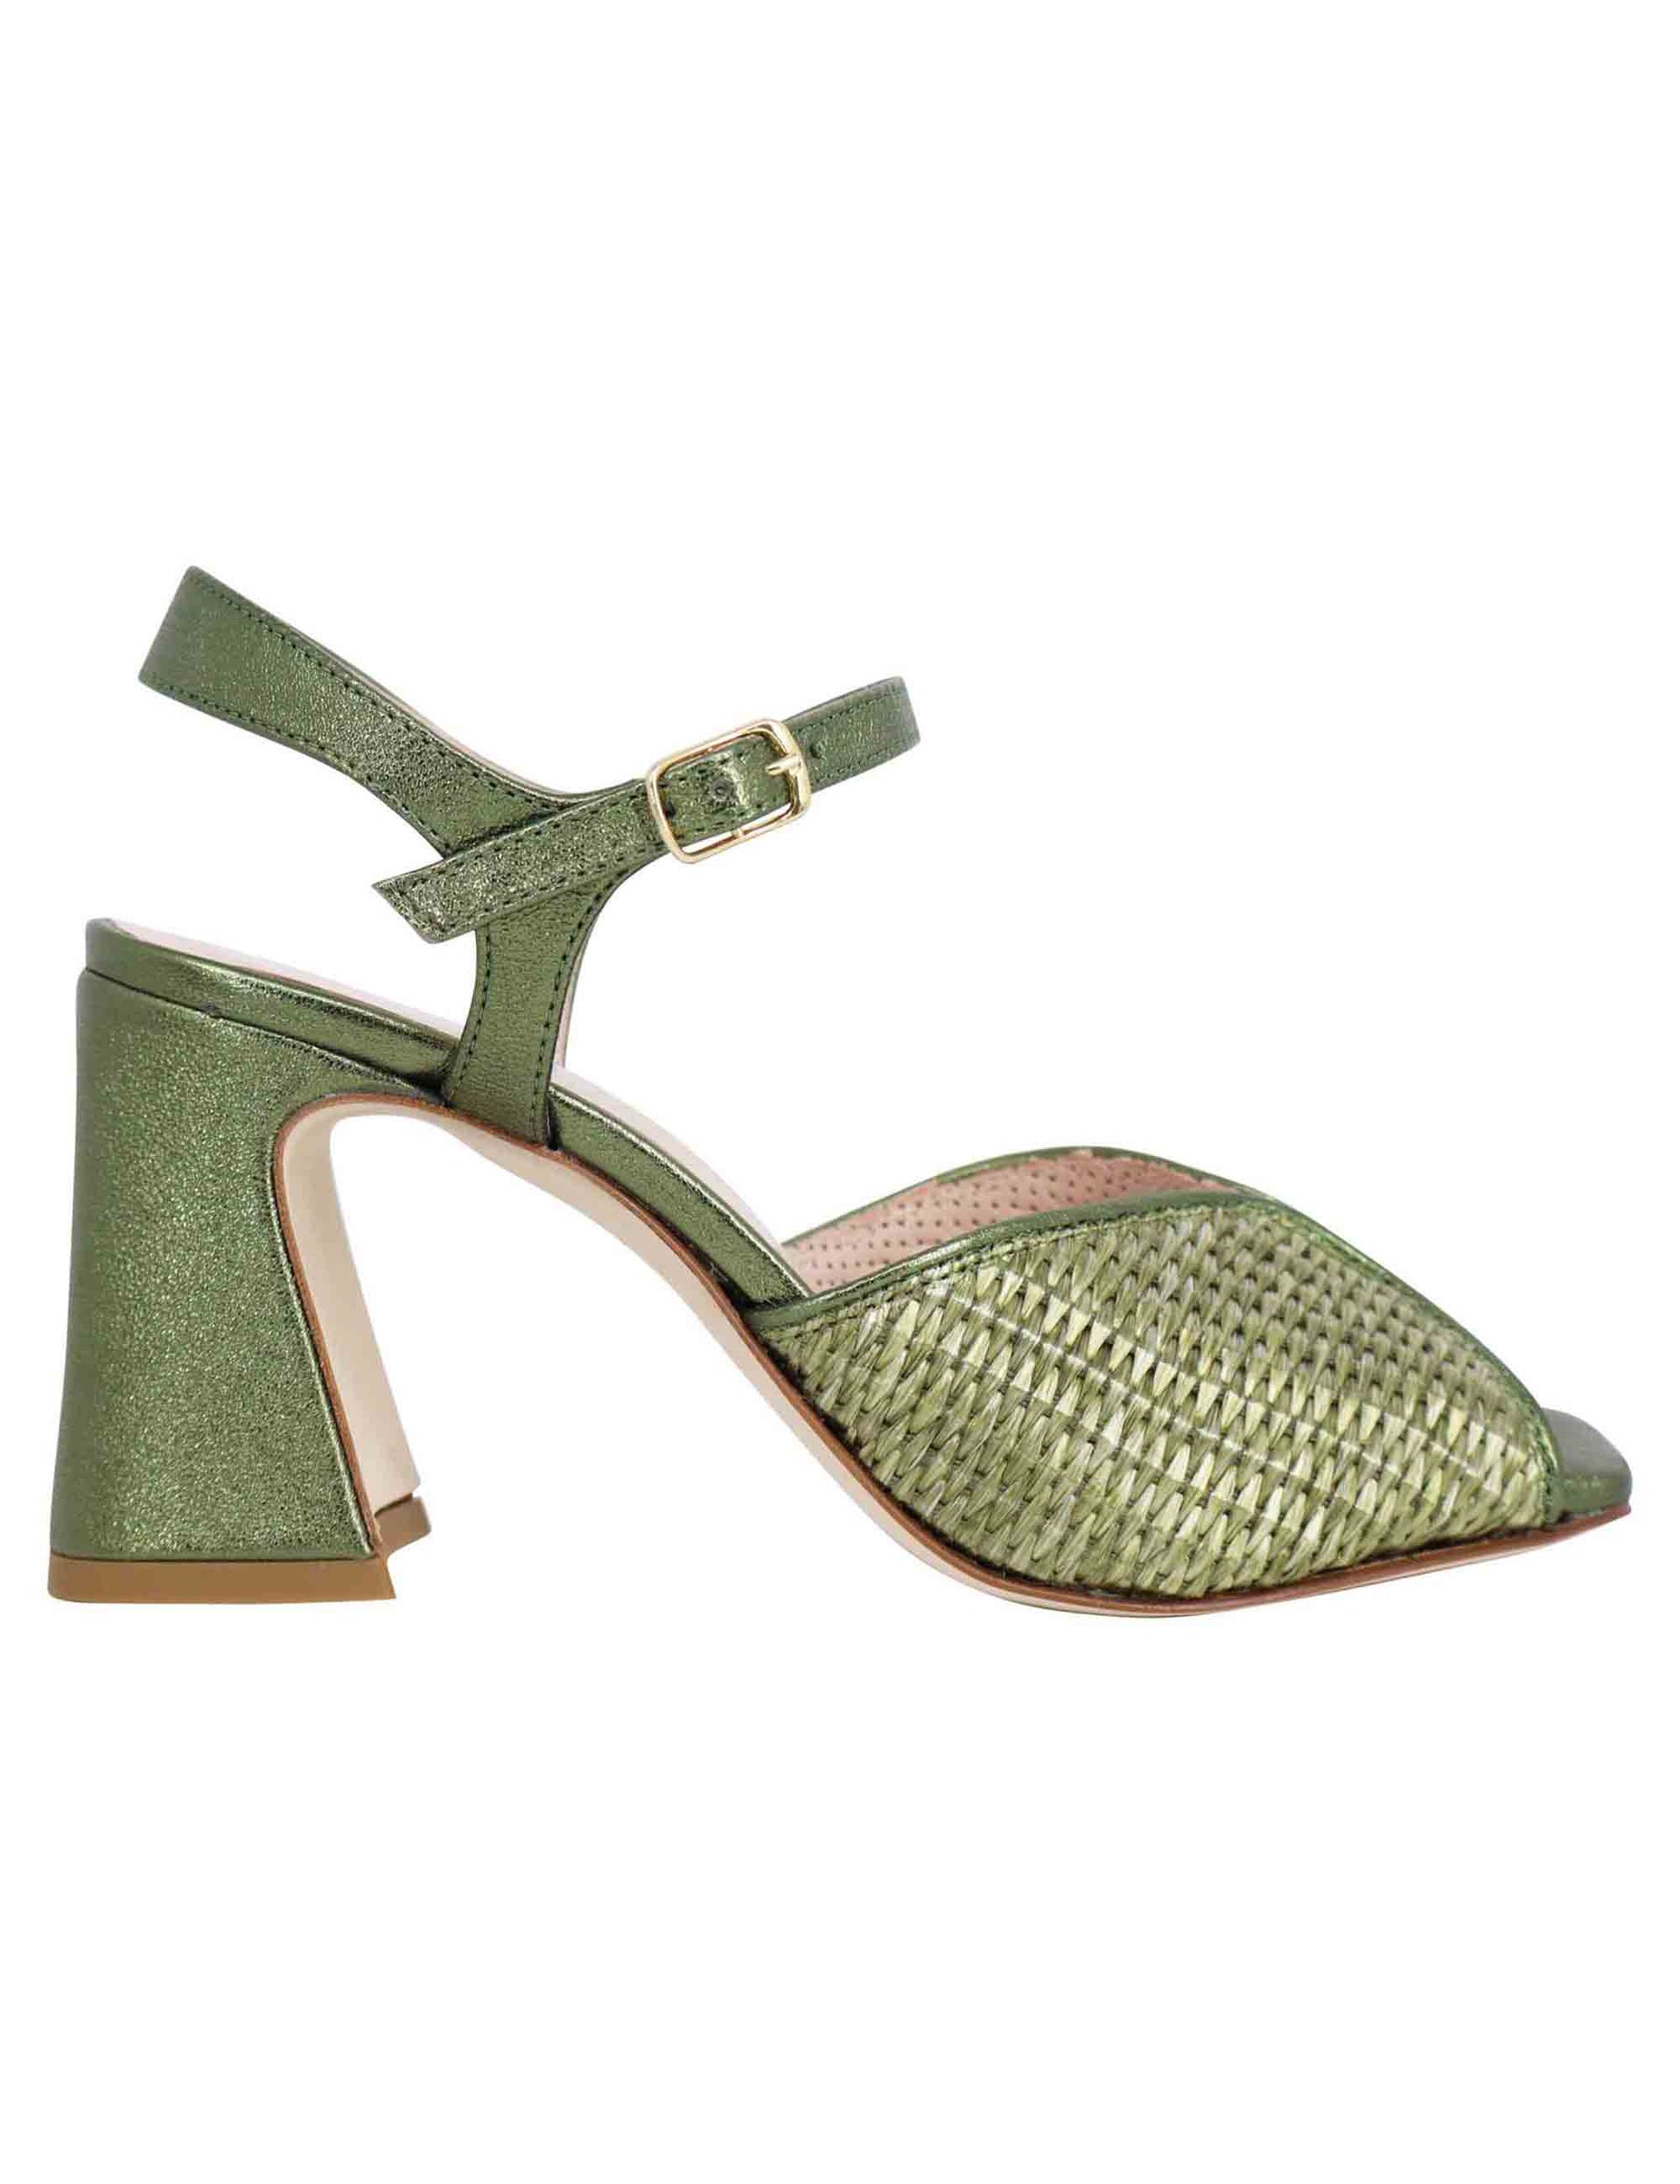 Women's sandals in green laminated leather with high heel and ankle strap